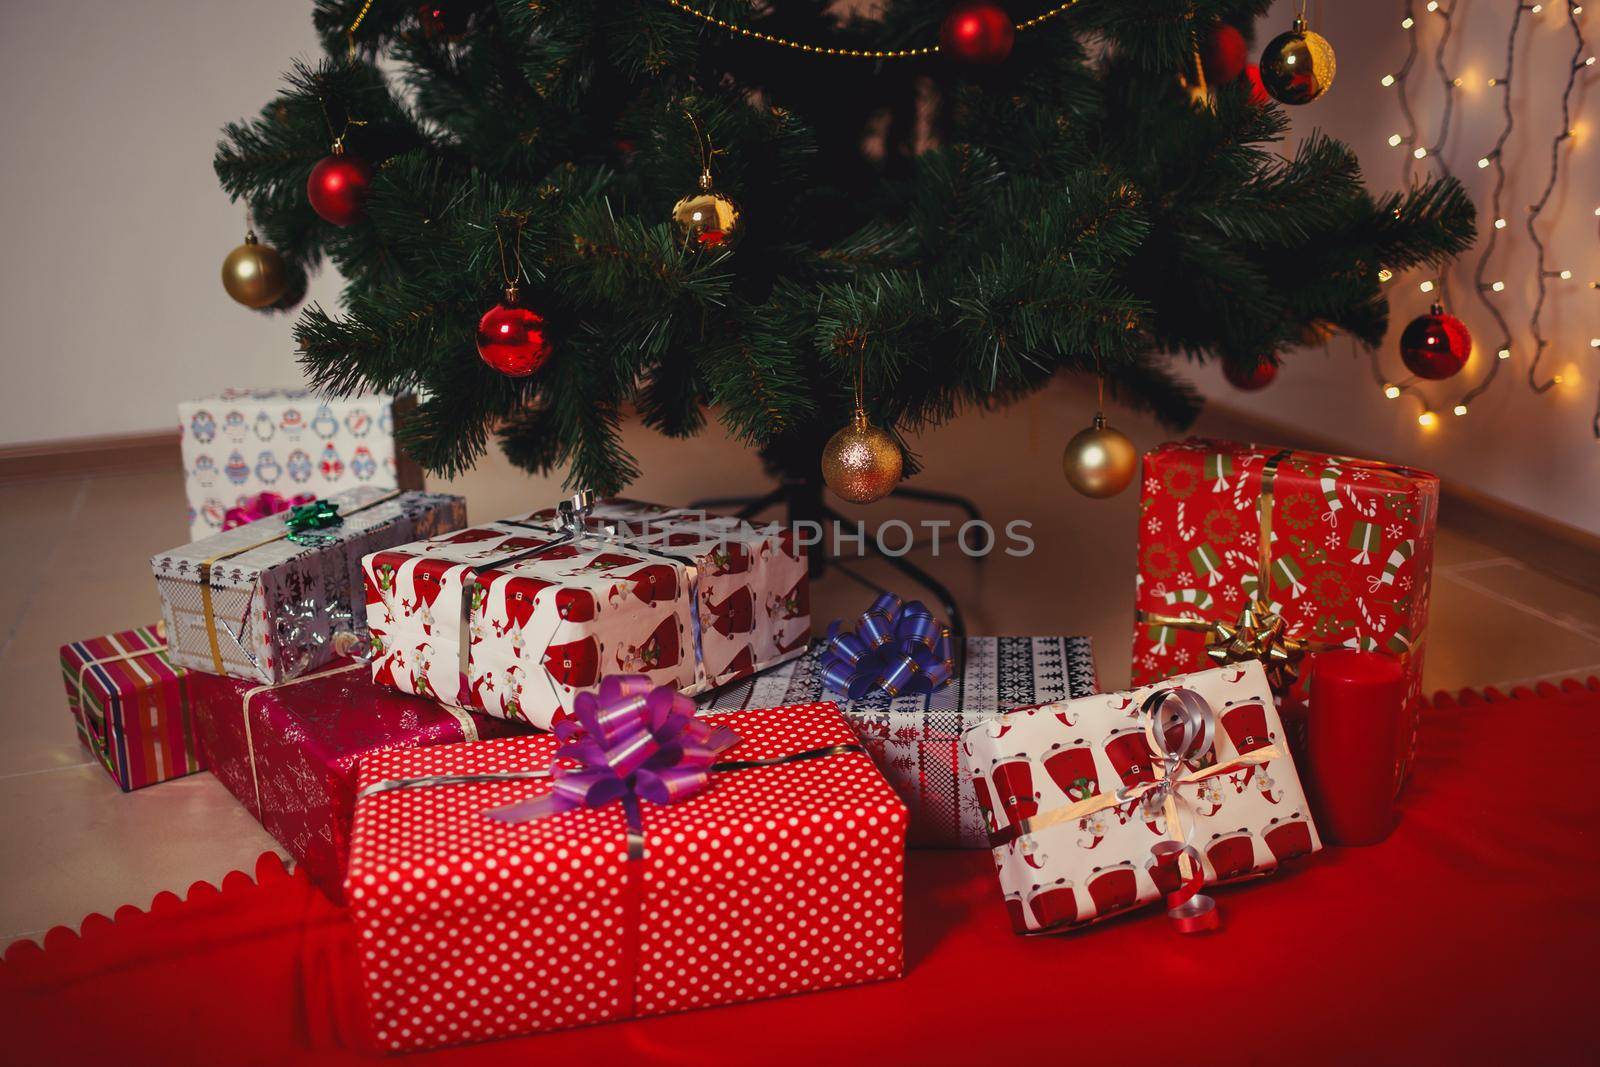 Christmas tree with Christmas toys. Gifts lying under the tree by deandy